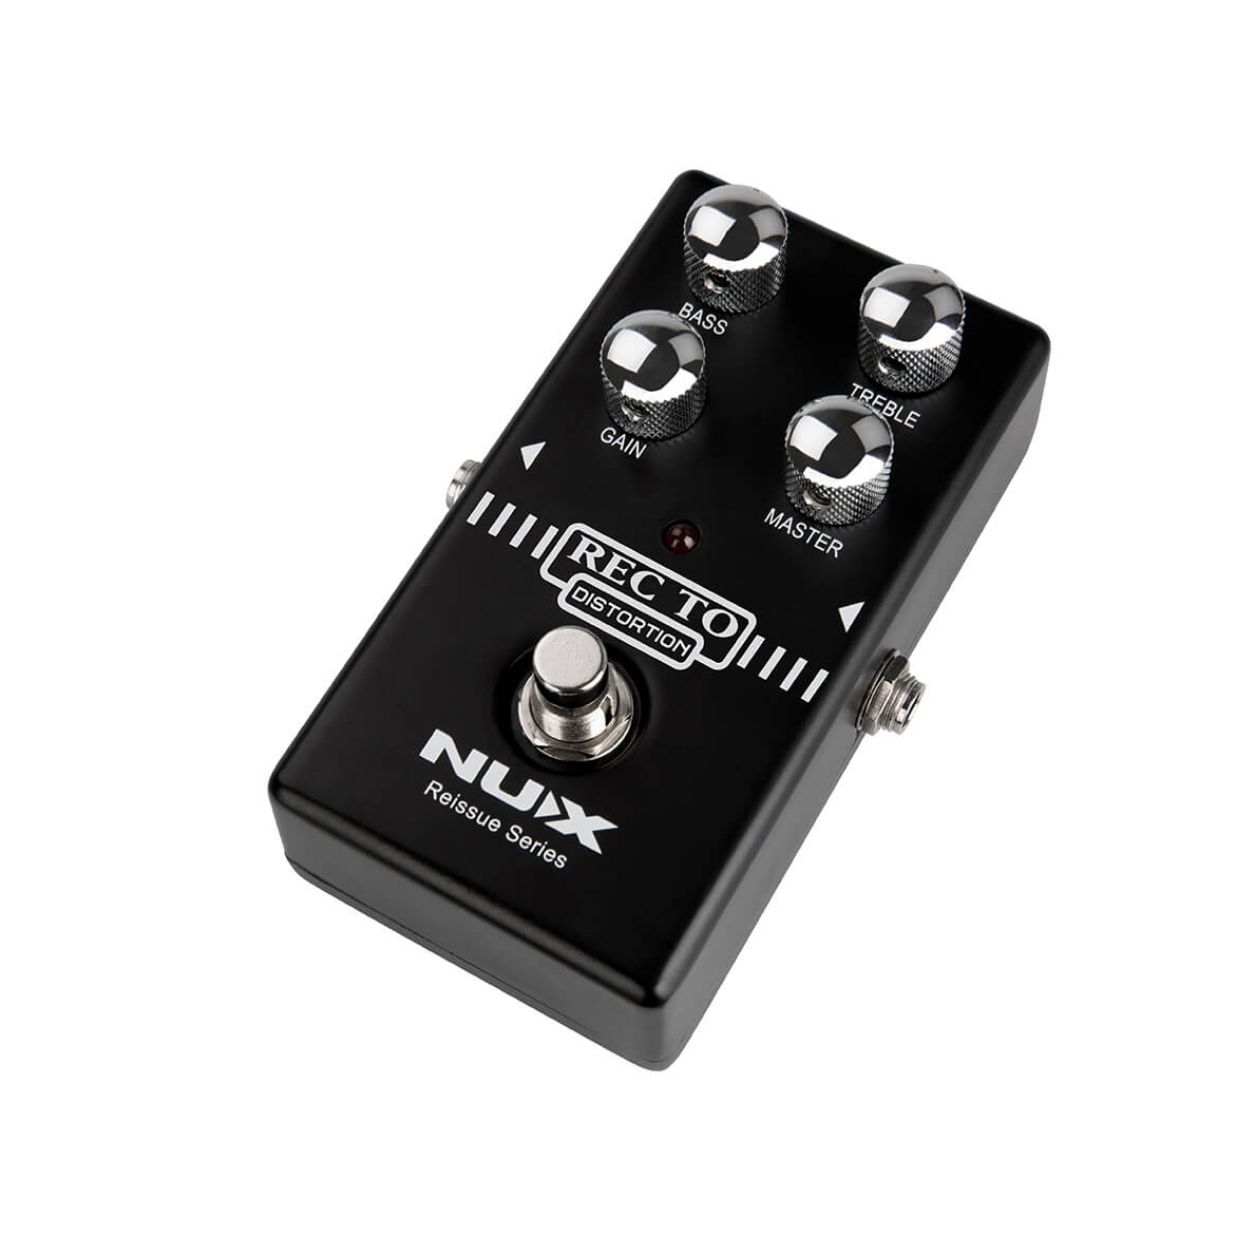 NUX REISSUE SRS RECTO DISTORTION EFFECT PEDAL